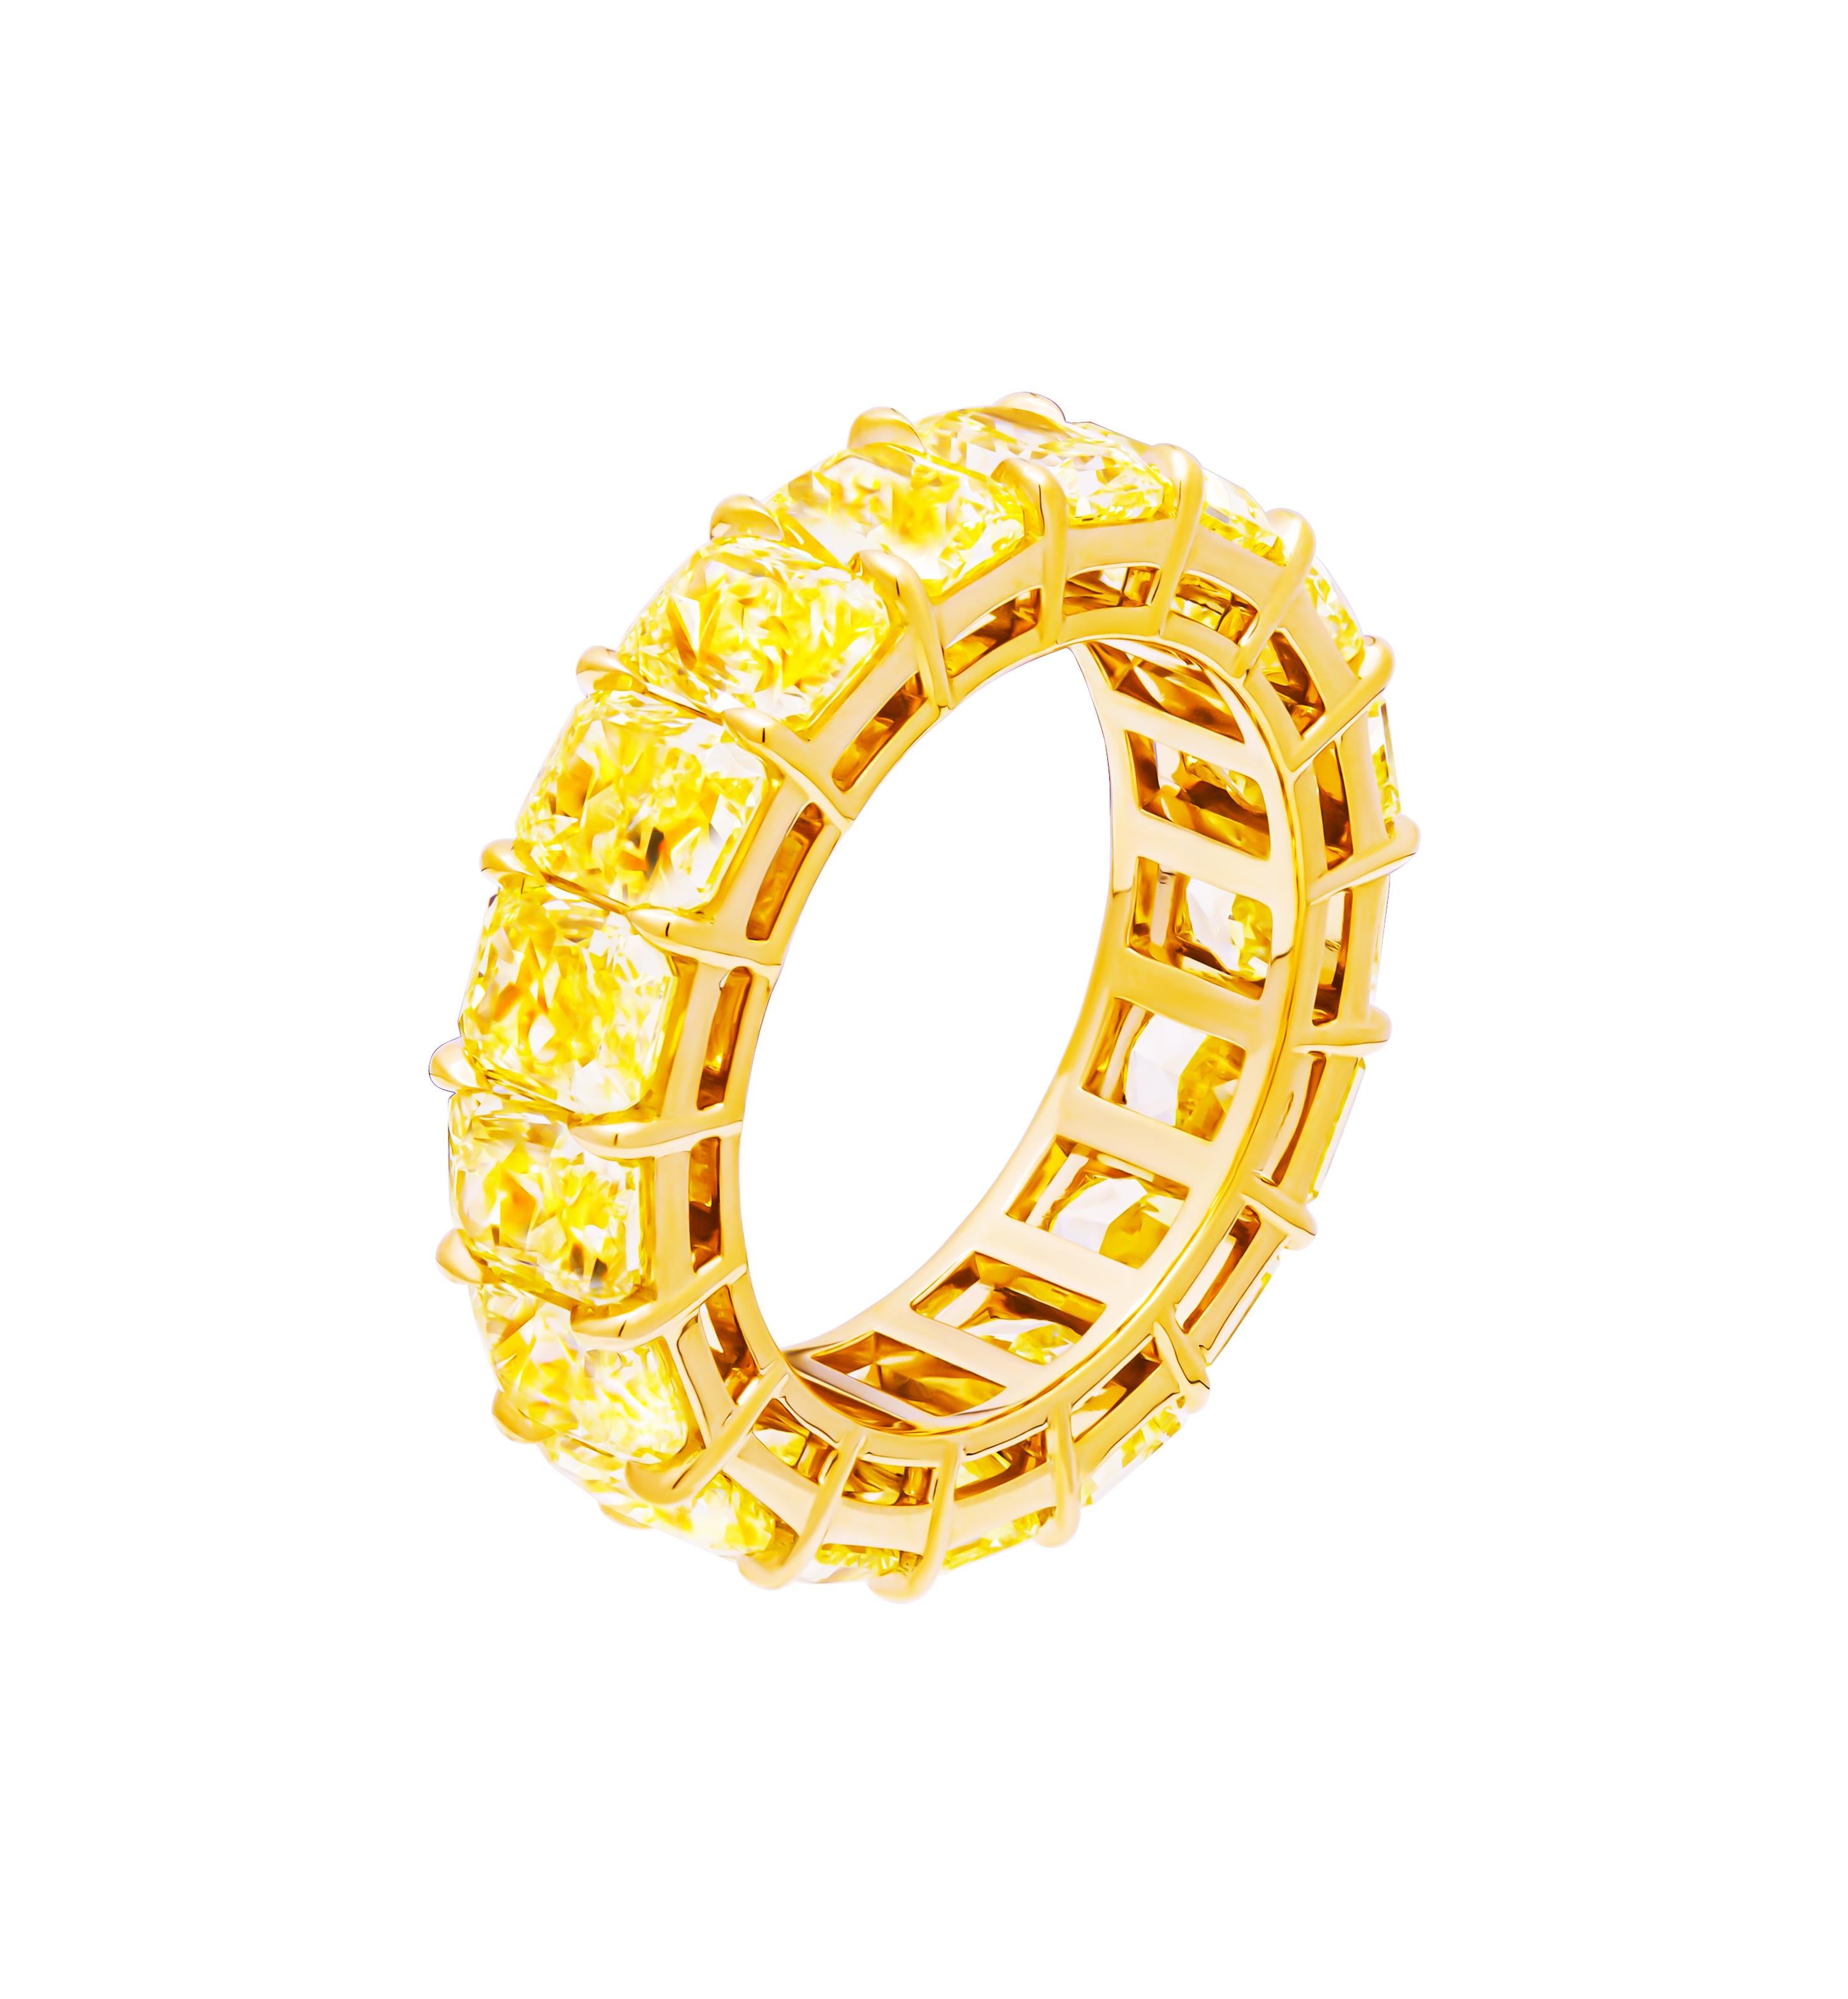 Introducing the breathtaking Eternityband, a radiant testament to timeless elegance and unparalleled beauty. Crafted in luxurious 18k yellow gold, this exquisite piece features a mesmerizing array of 17 GIA certified Fancy Intense Yellow radiant-cut